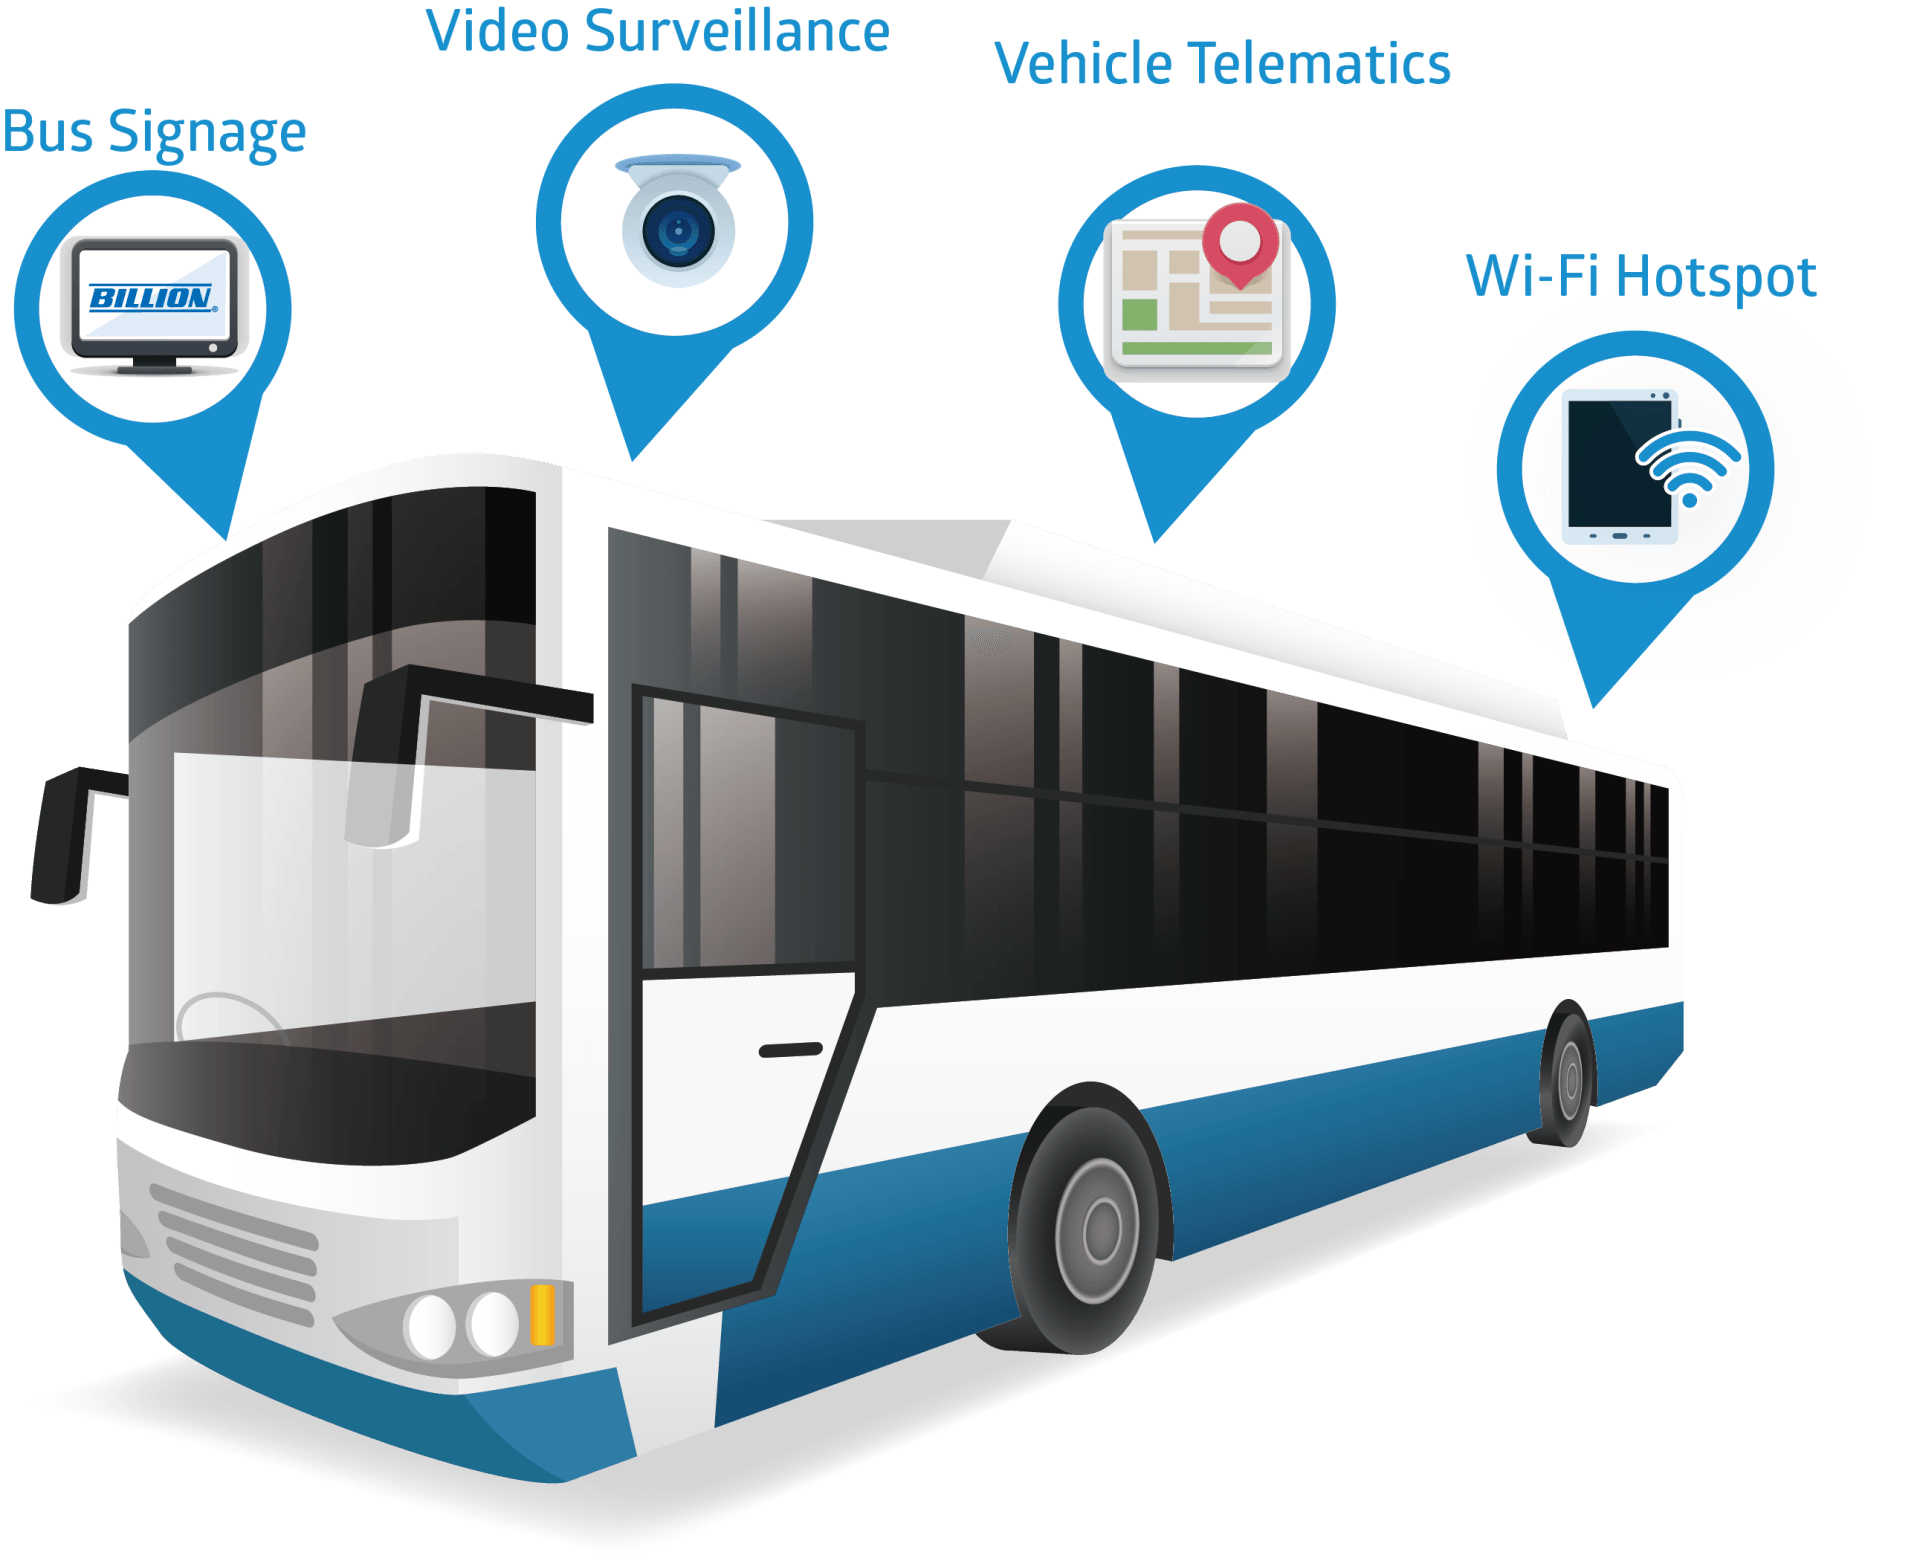 5G/LTE-Advanced Cellular Routers for Public Transportation Such as